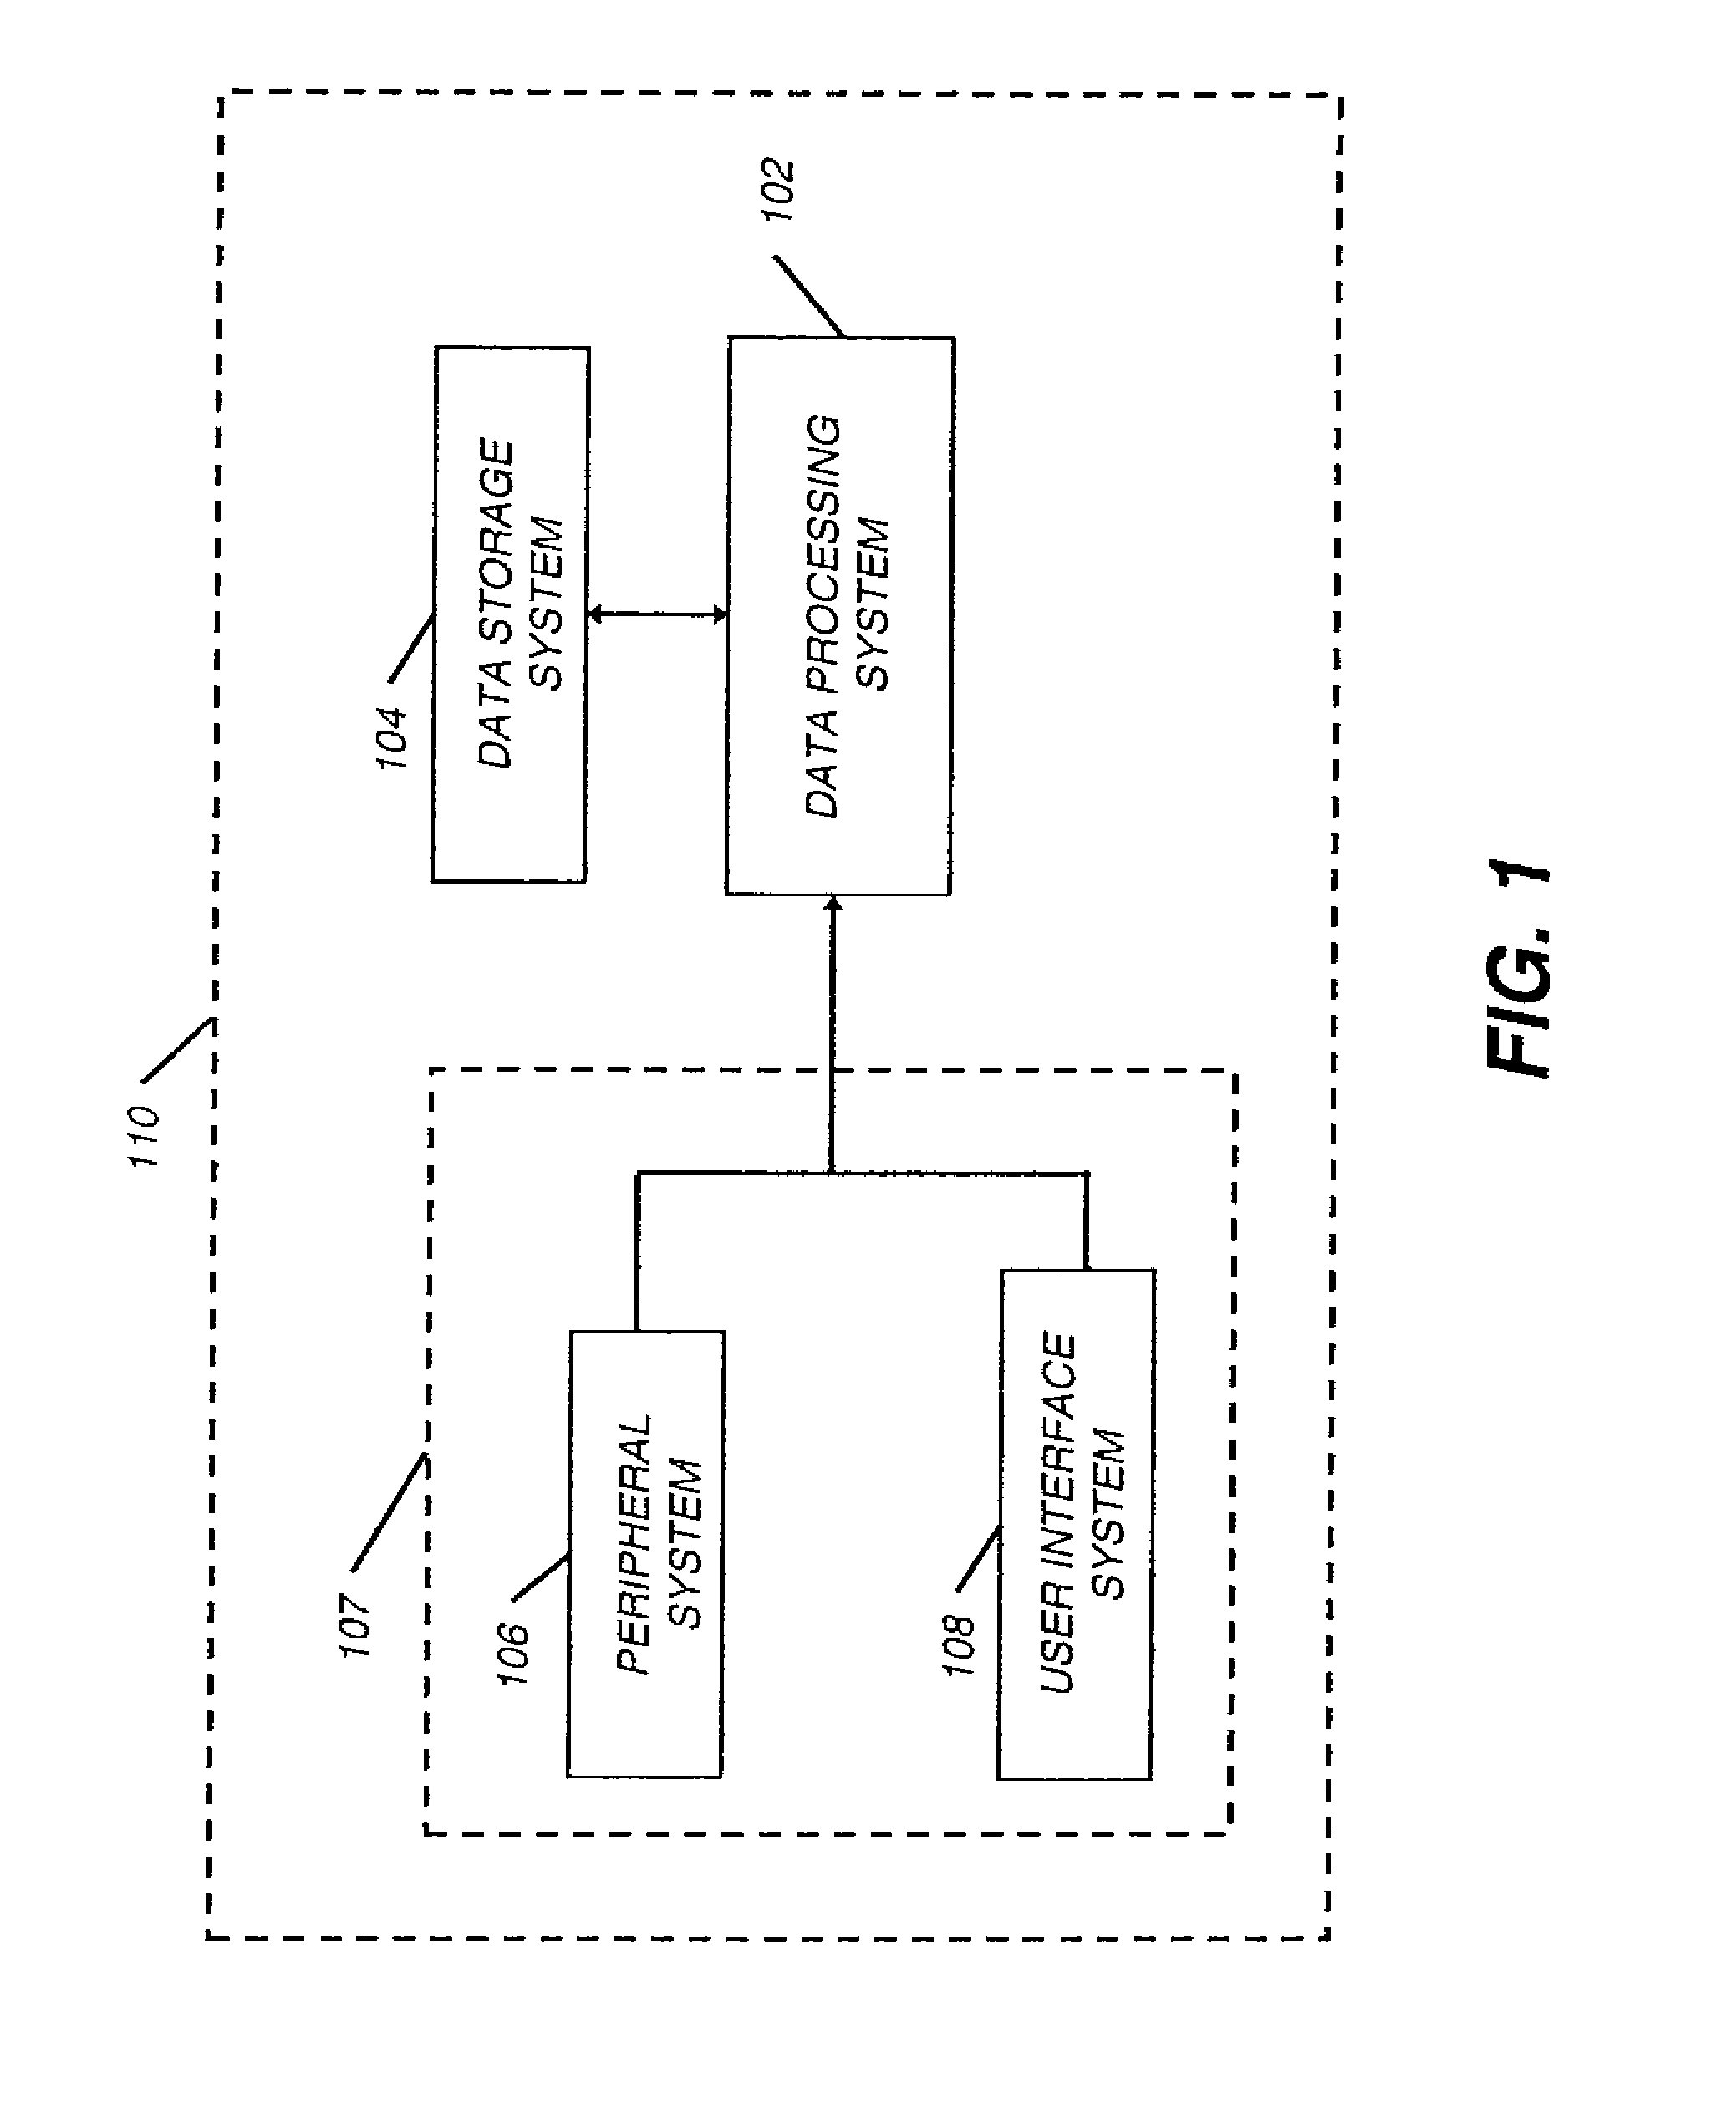 Image capture and display configuration